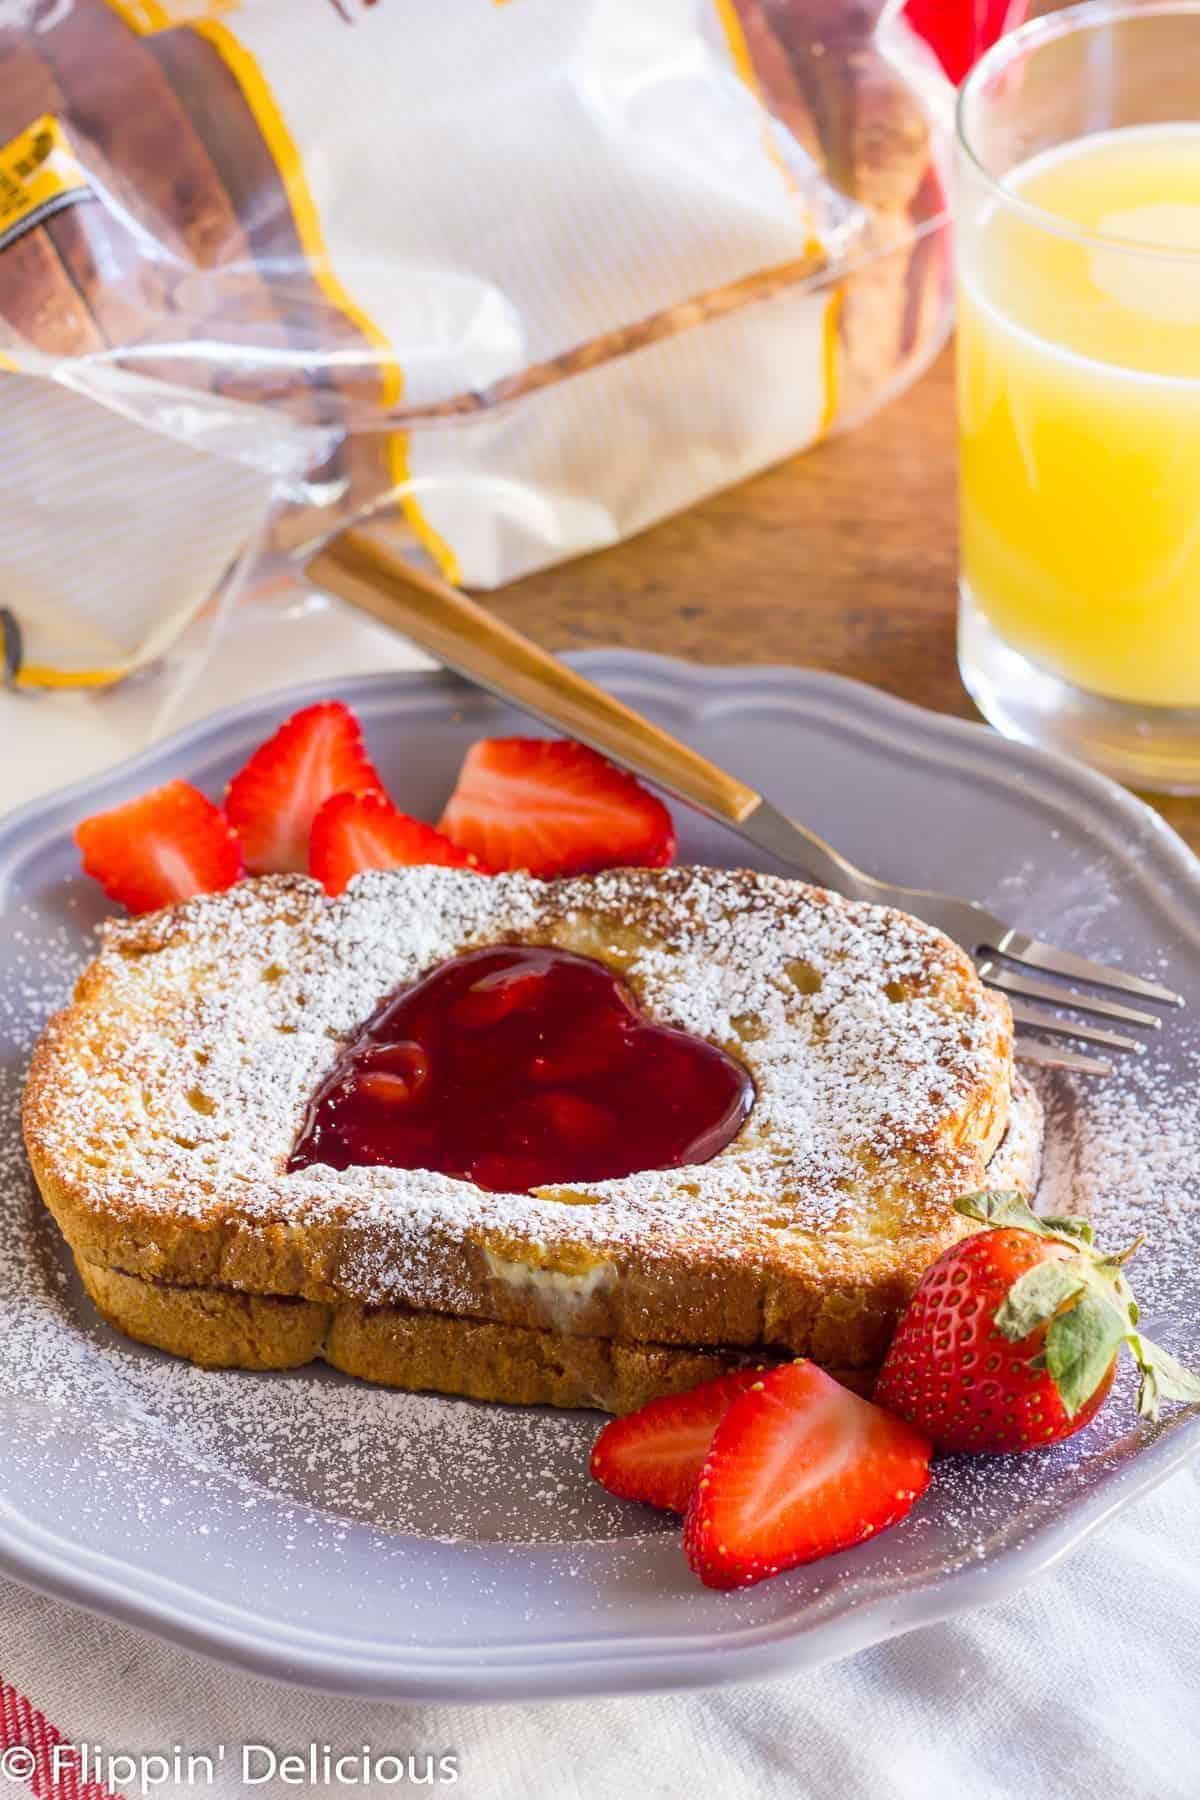 Mouth-watering Gluten-Free Nutella Stuffed French Toast with ripe strawberries on a purple plate with a fork.